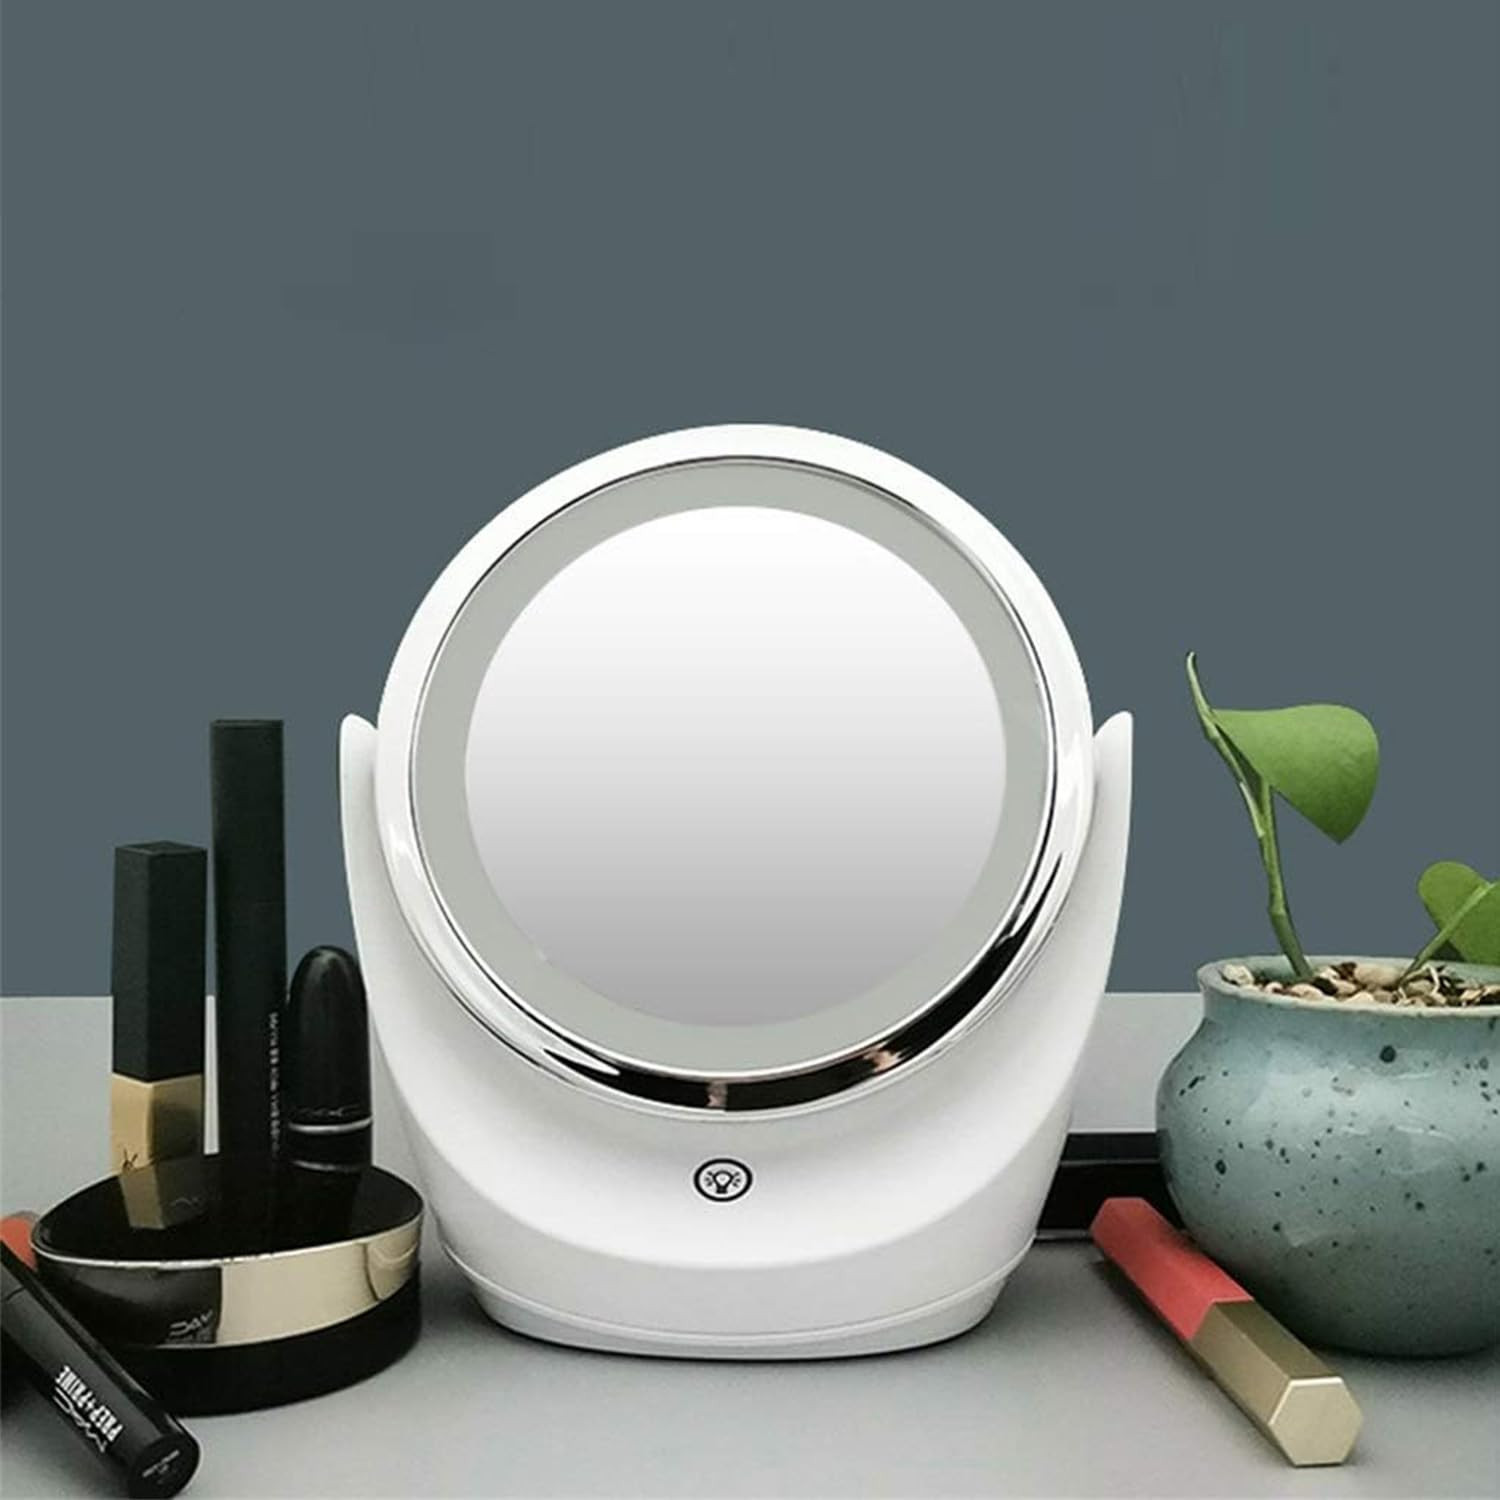 kuber industires small makeup mirror with led lightmirror for table top vanity deskbattery operated 4399599334341162 l